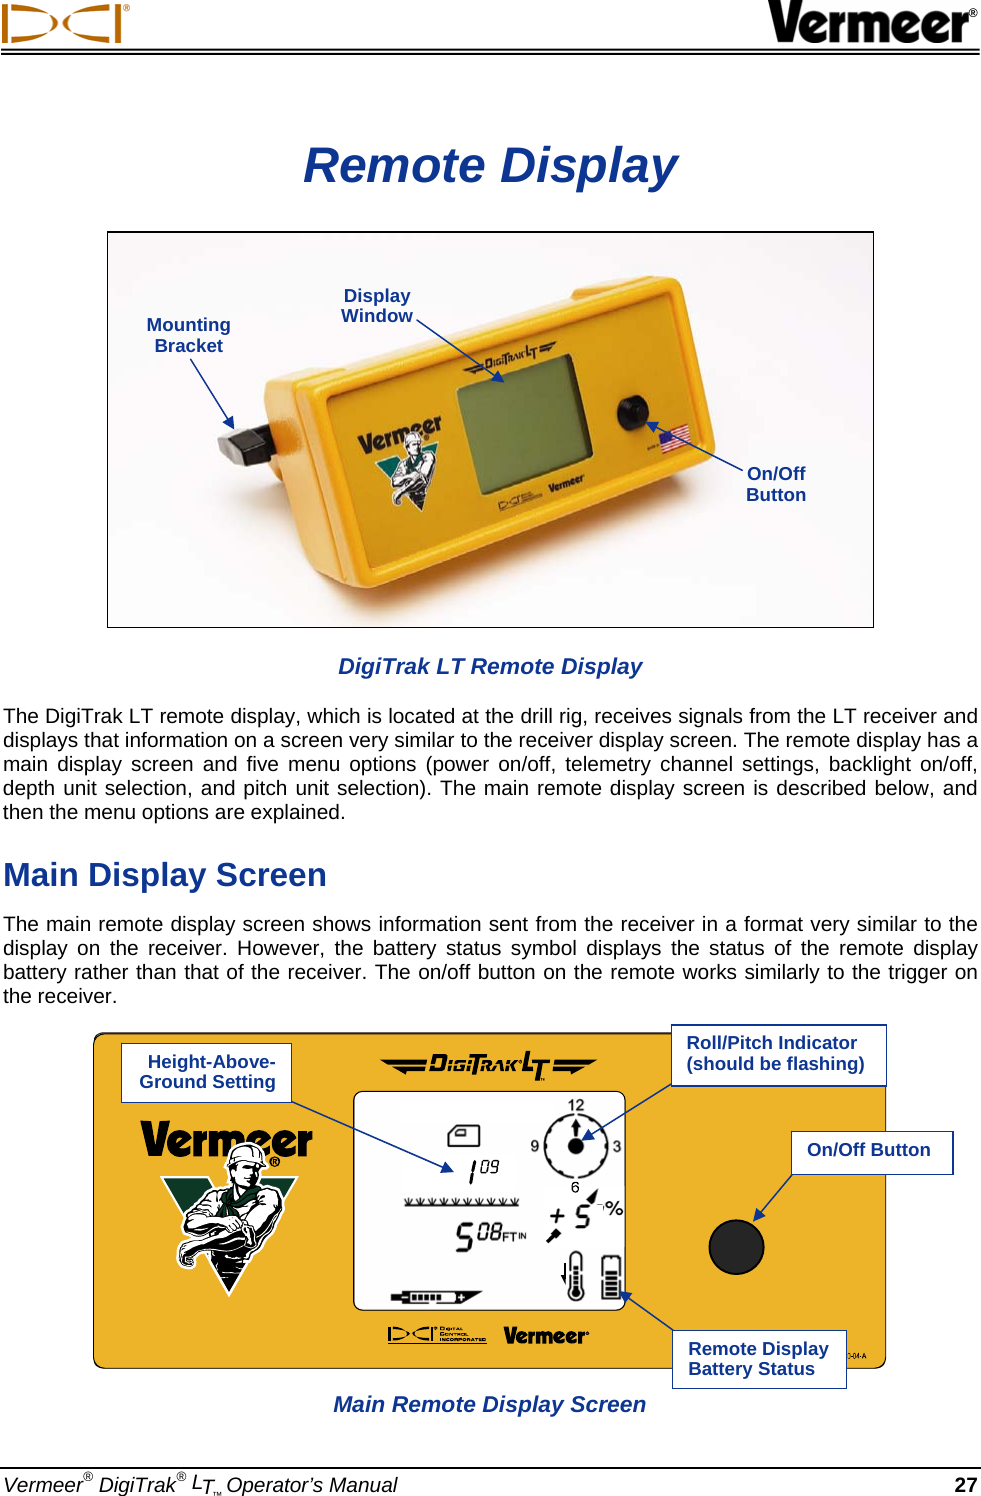  ® Vermeer® DigiTrak® LT™ Operator’s Manual 27 Remote Display  DigiTrak LT Remote Display The DigiTrak LT remote display, which is located at the drill rig, receives signals from the LT receiver and displays that information on a screen very similar to the receiver display screen. The remote display has a main display screen and five menu options (power on/off, telemetry channel settings, backlight on/off, depth unit selection, and pitch unit selection). The main remote display screen is described below, and then the menu options are explained.  Main Display Screen The main remote display screen shows information sent from the receiver in a format very similar to the display on the receiver. However, the battery status symbol displays the status of the remote display battery rather than that of the receiver. The on/off button on the remote works similarly to the trigger on the receiver. Mounting Bracket Display Window On/Off Button  Main Remote Display Screen Height-Above-Ground Setting On/Off ButtonRemote Display Battery Status Roll/Pitch Indicator  (should be flashing) 